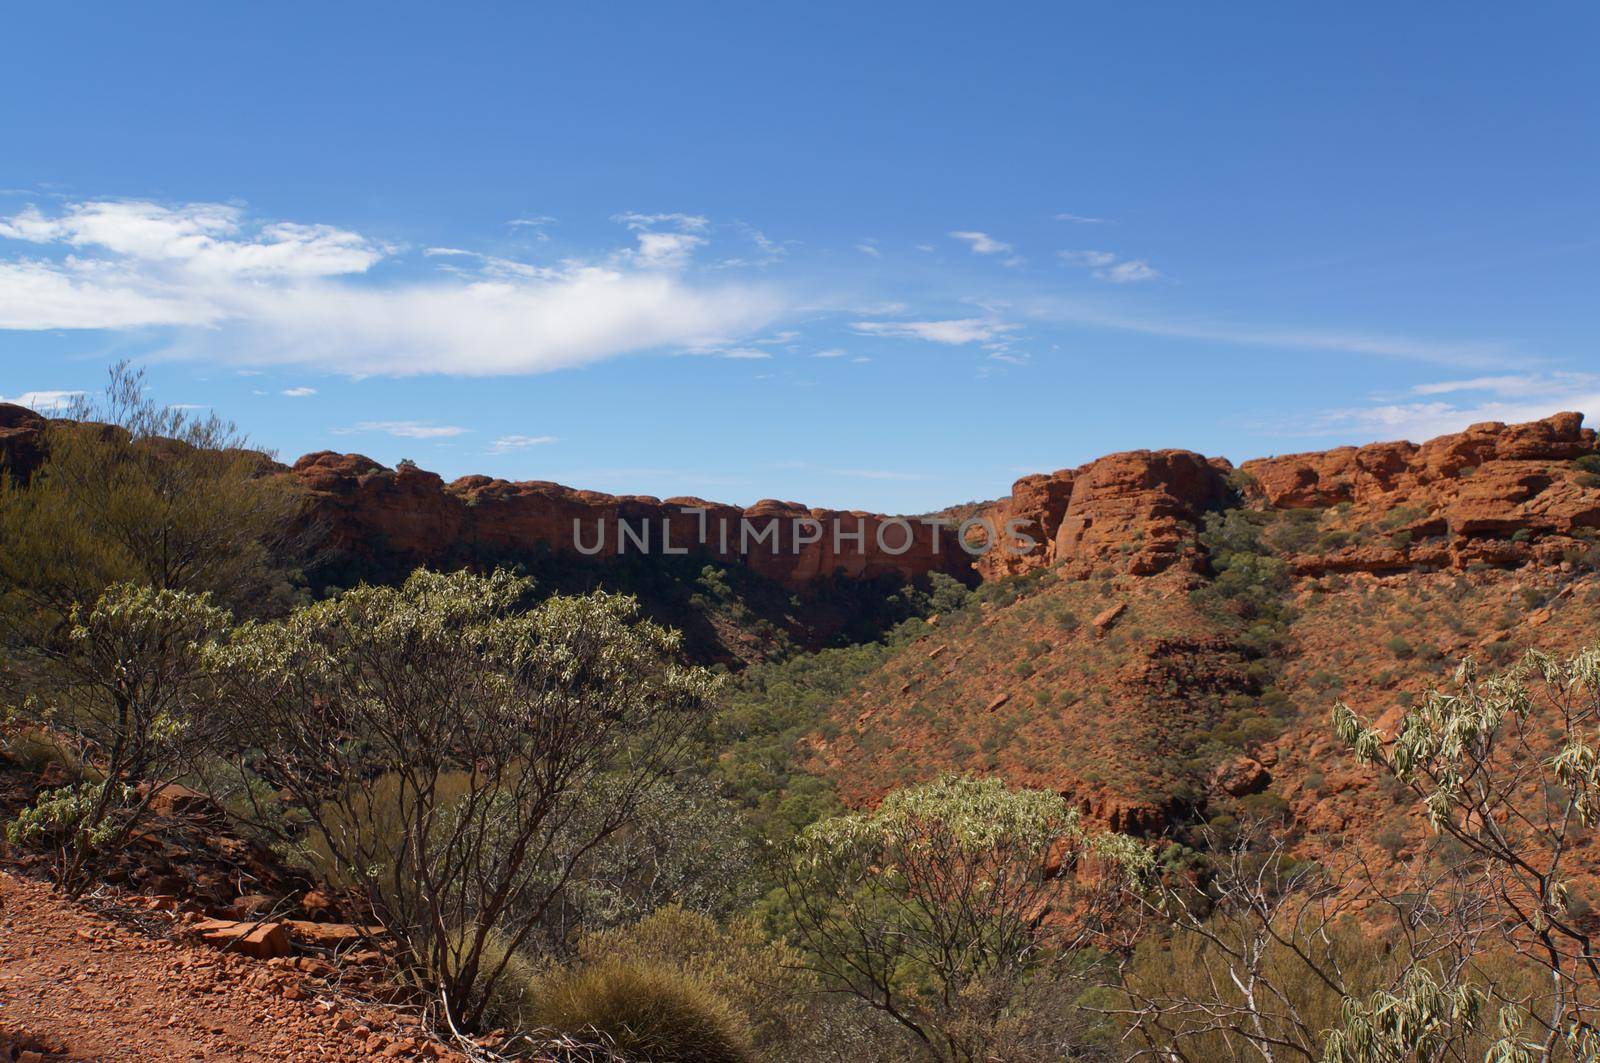 view into a Canyon in australia, Watarrka National Park, Northern Territory, Australia